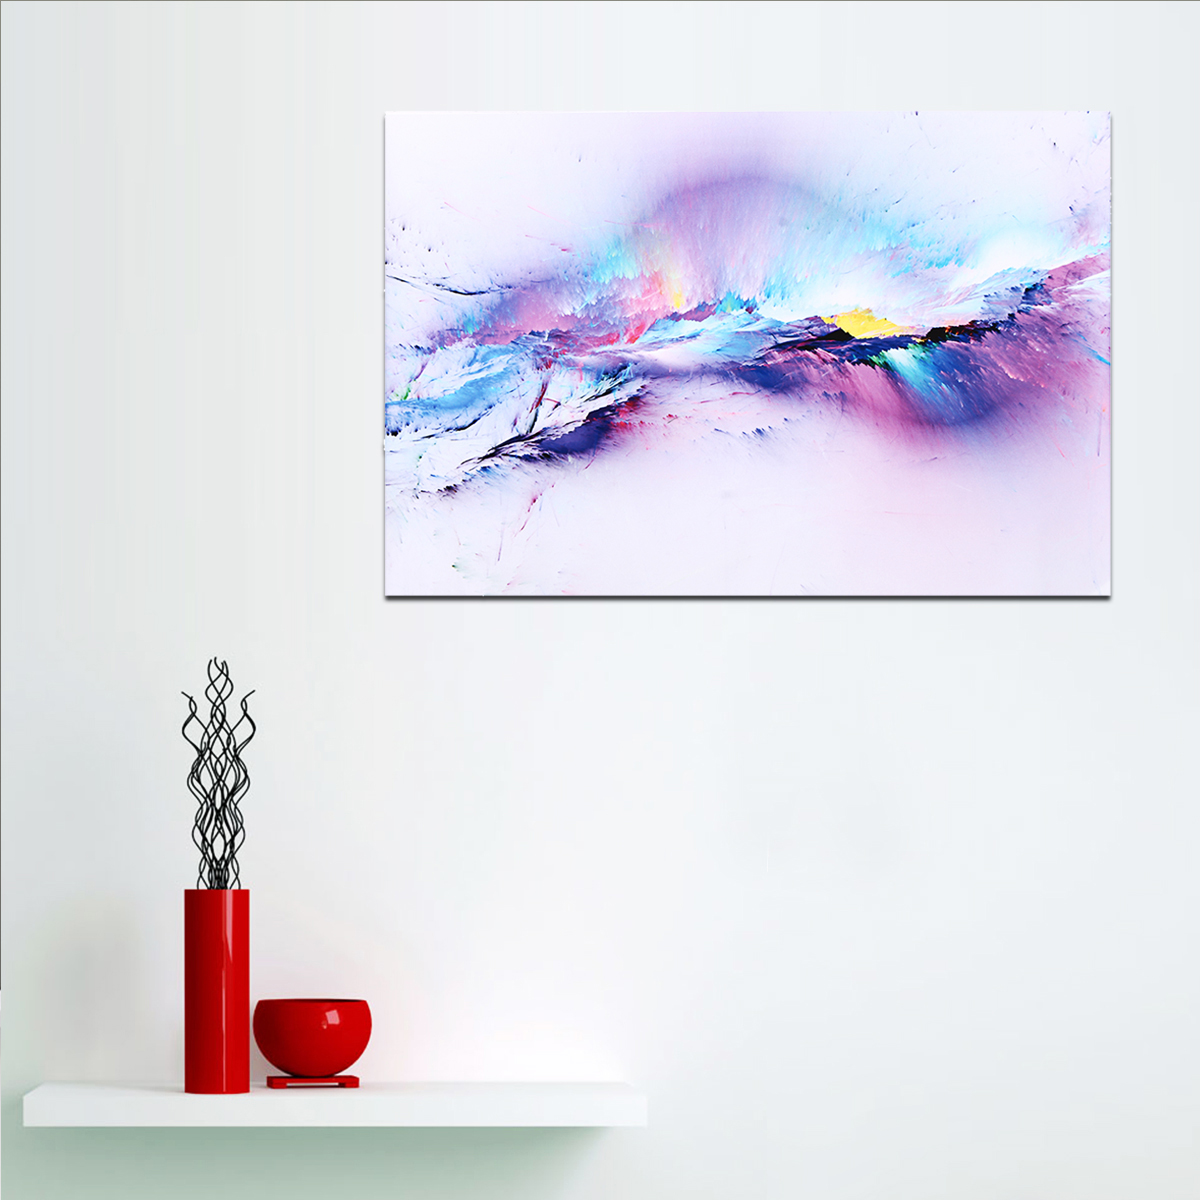 

Modern Graffiti Canvas Print Oil Paintings Unframed Pictures Art Home Wall Decor